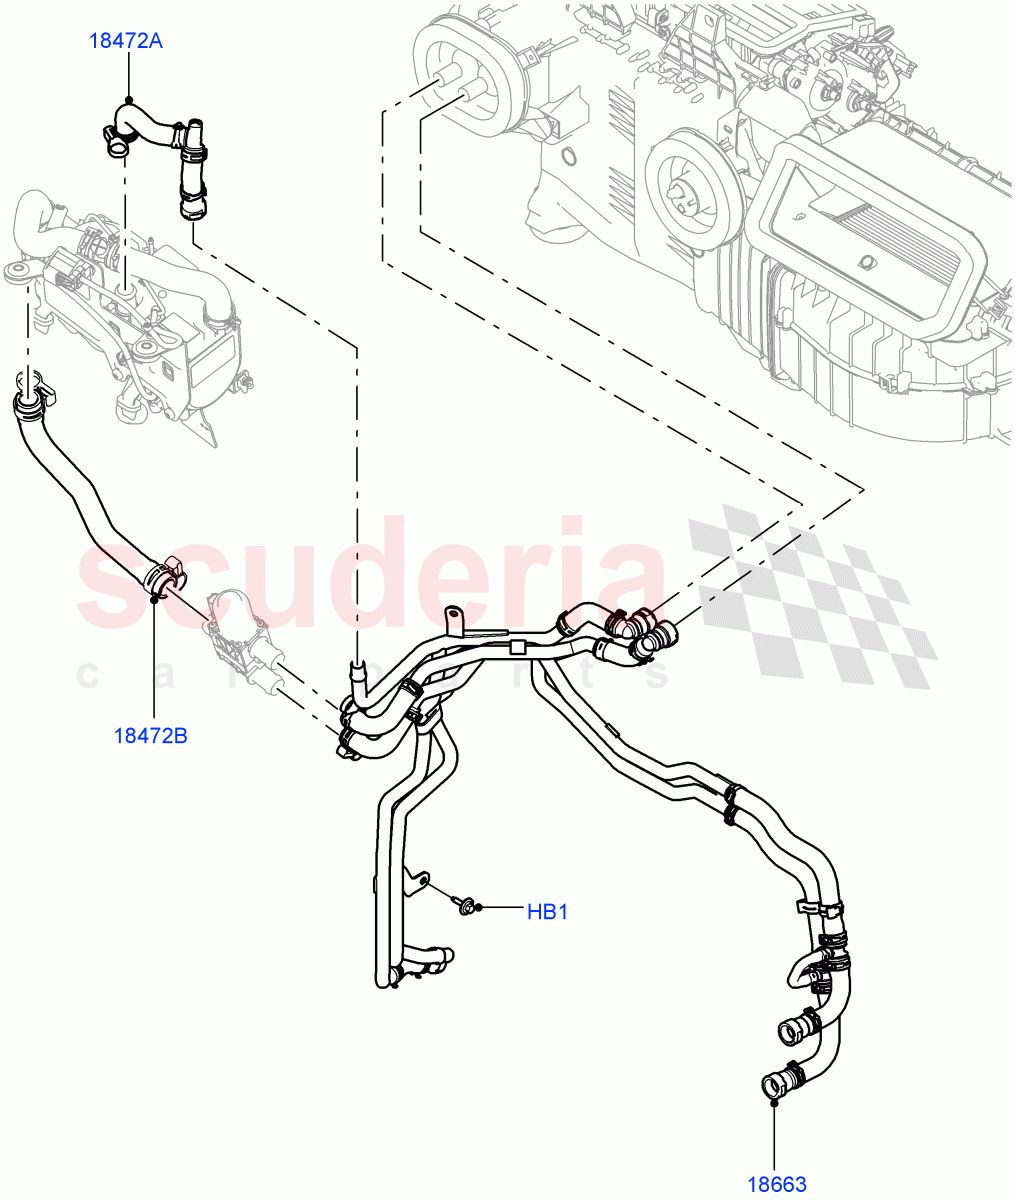 Heater Hoses(Front)(2.0L I4 DSL HIGH DOHC AJ200,With Fuel Fired Heater,With Air Conditioning - Front/Rear,Park Heating With Remote Control)((V)FROMHA000001,(V)TOHA999999) of Land Rover Land Rover Range Rover Sport (2014+) [2.0 Turbo Petrol GTDI]